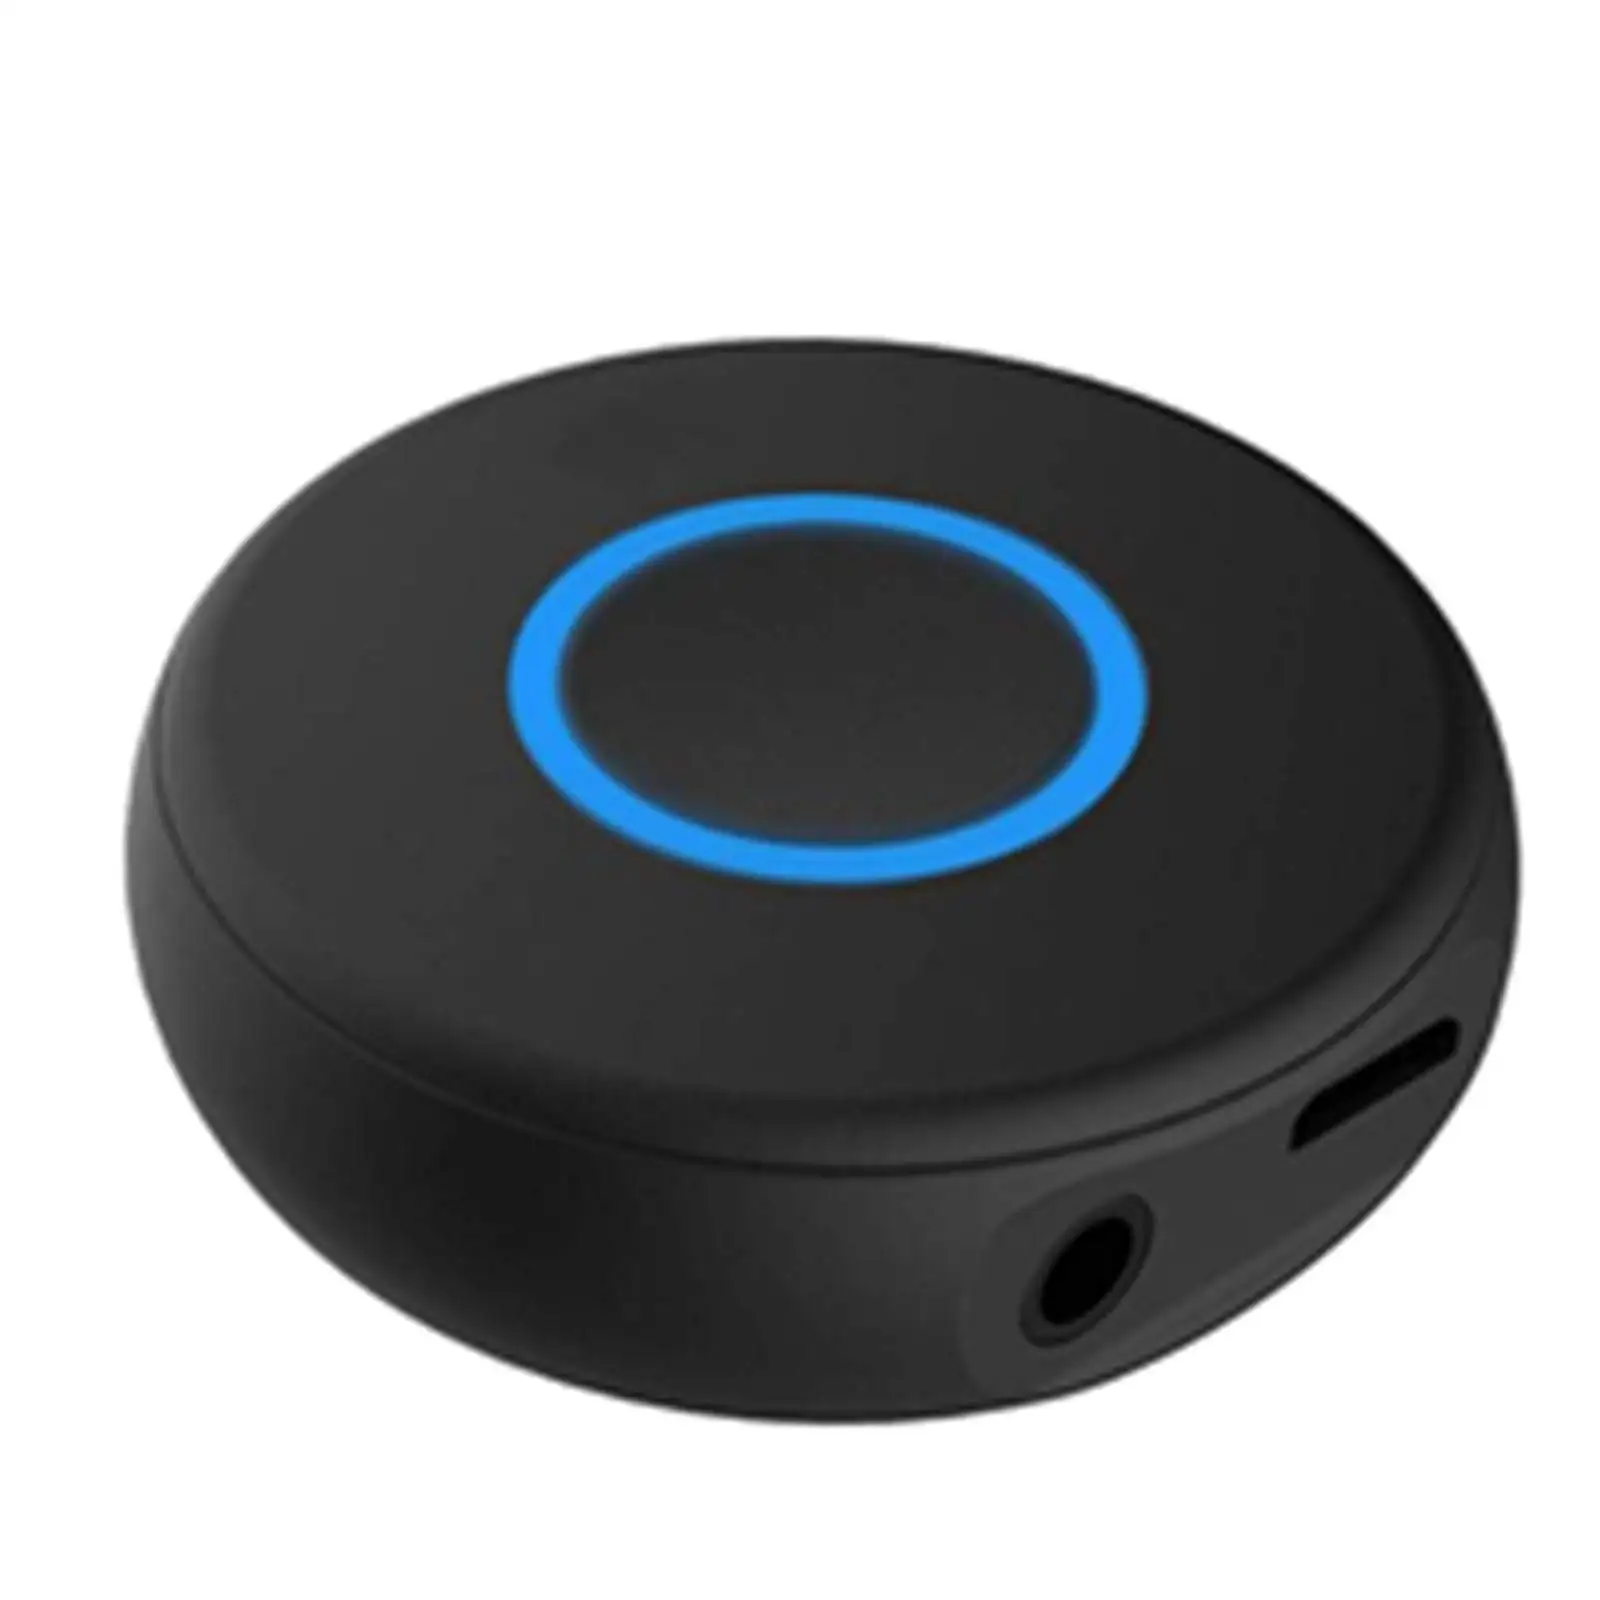 Bluetooth Adapter Transmitter with AUX 3.5mm for Home Car Music Sound System for TV Headphones Speaker PC